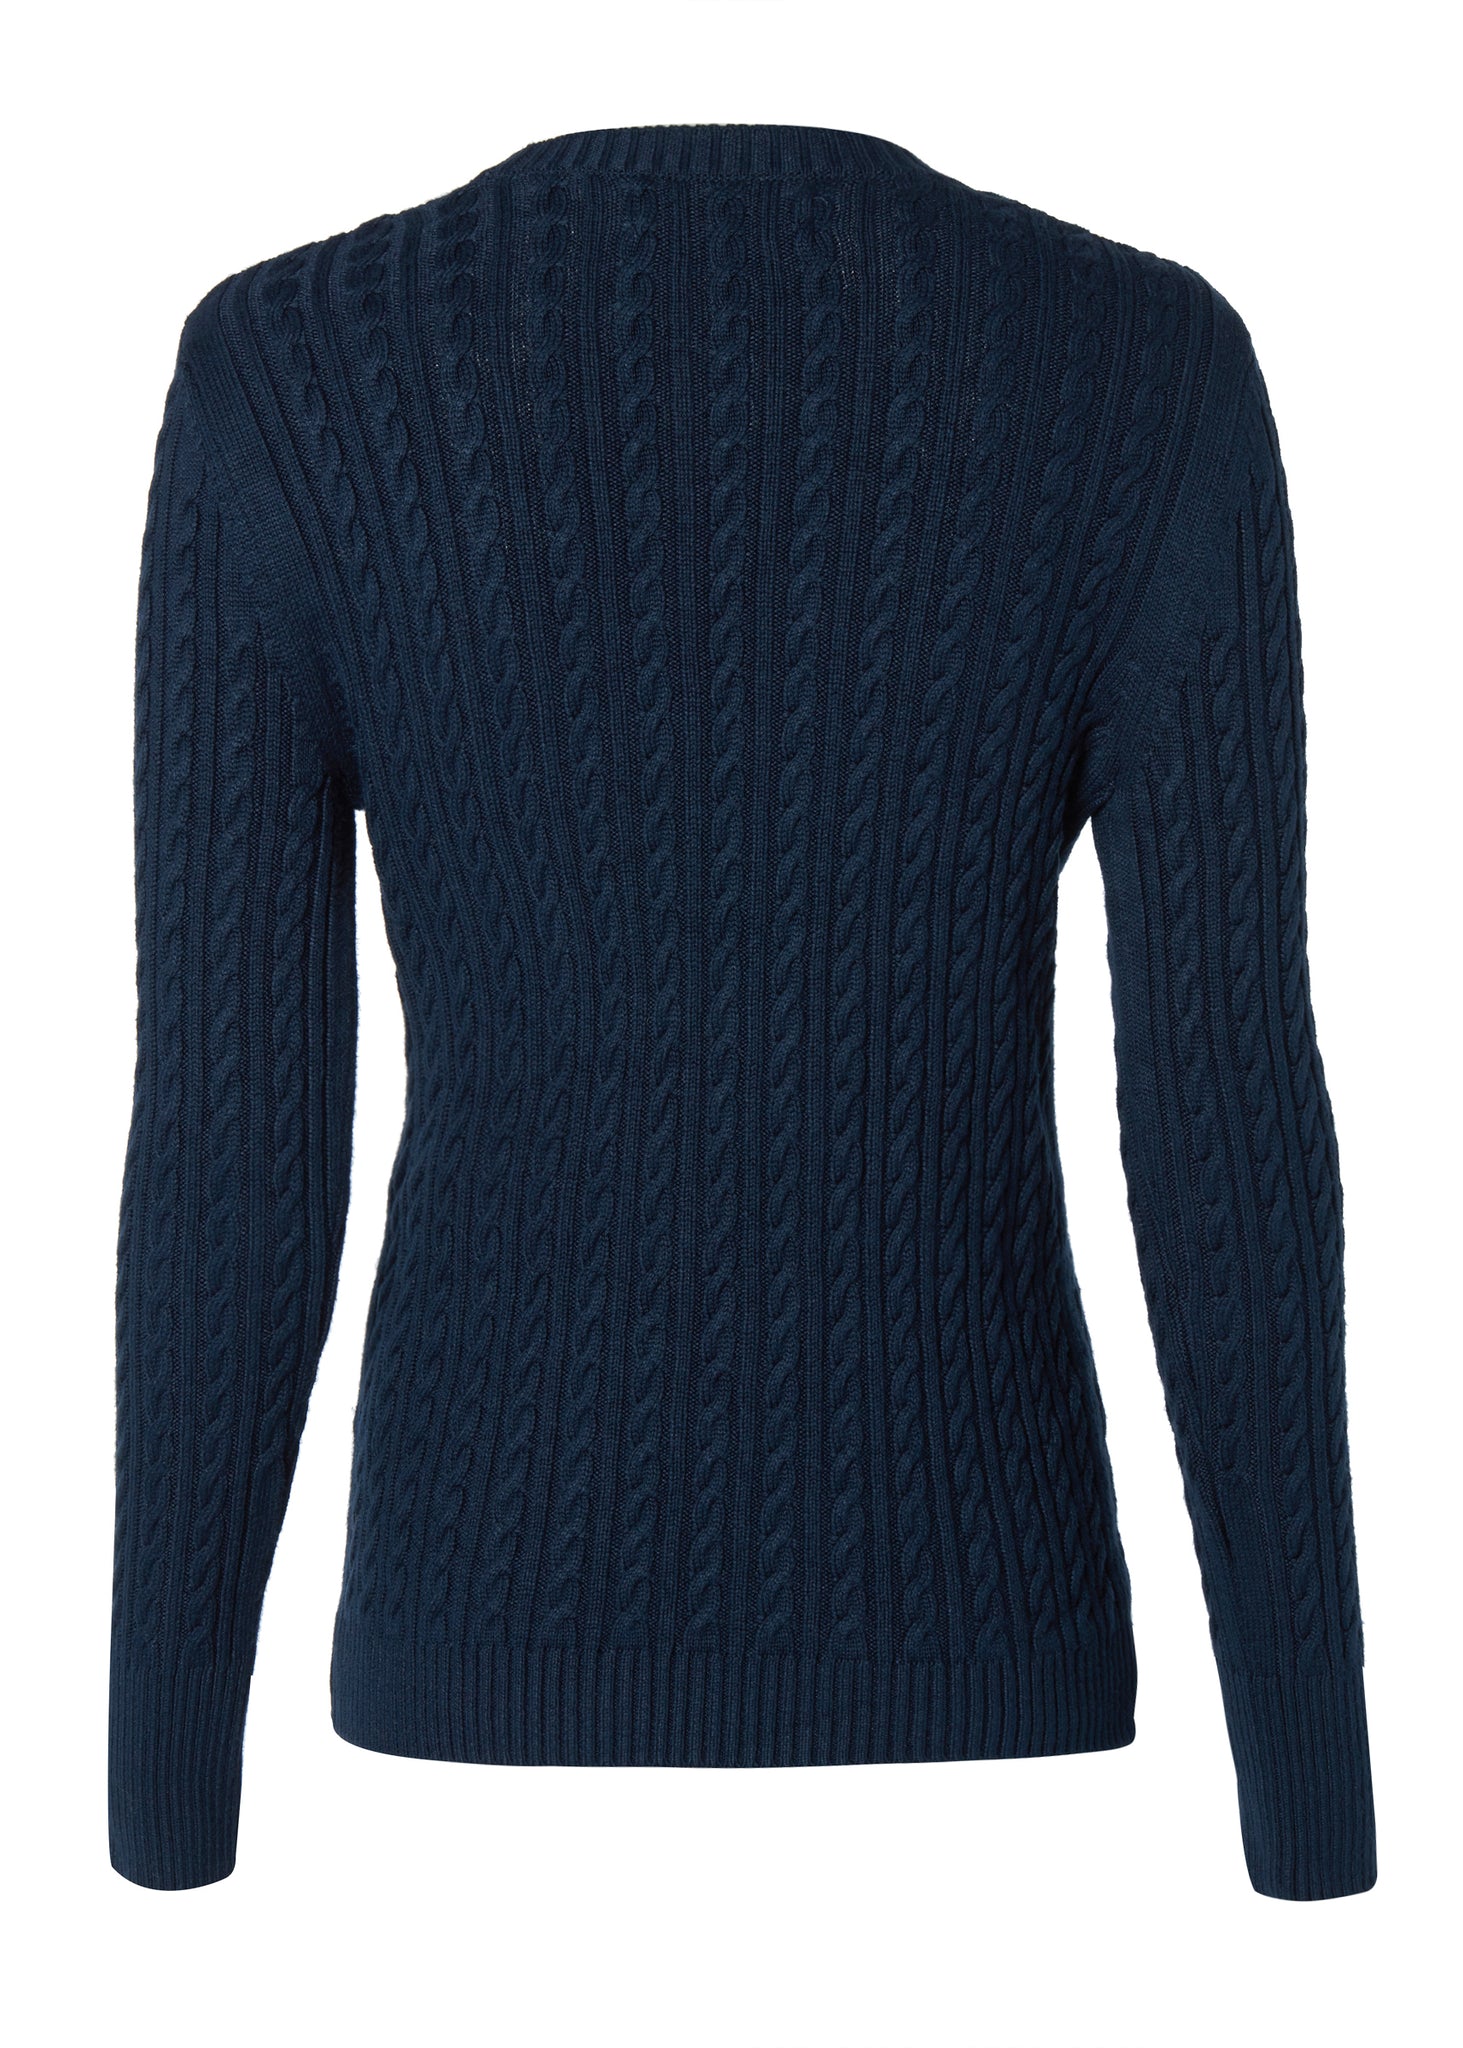 back of womens cable knit jumper in navy with ribbed crew neck cuffs and hem